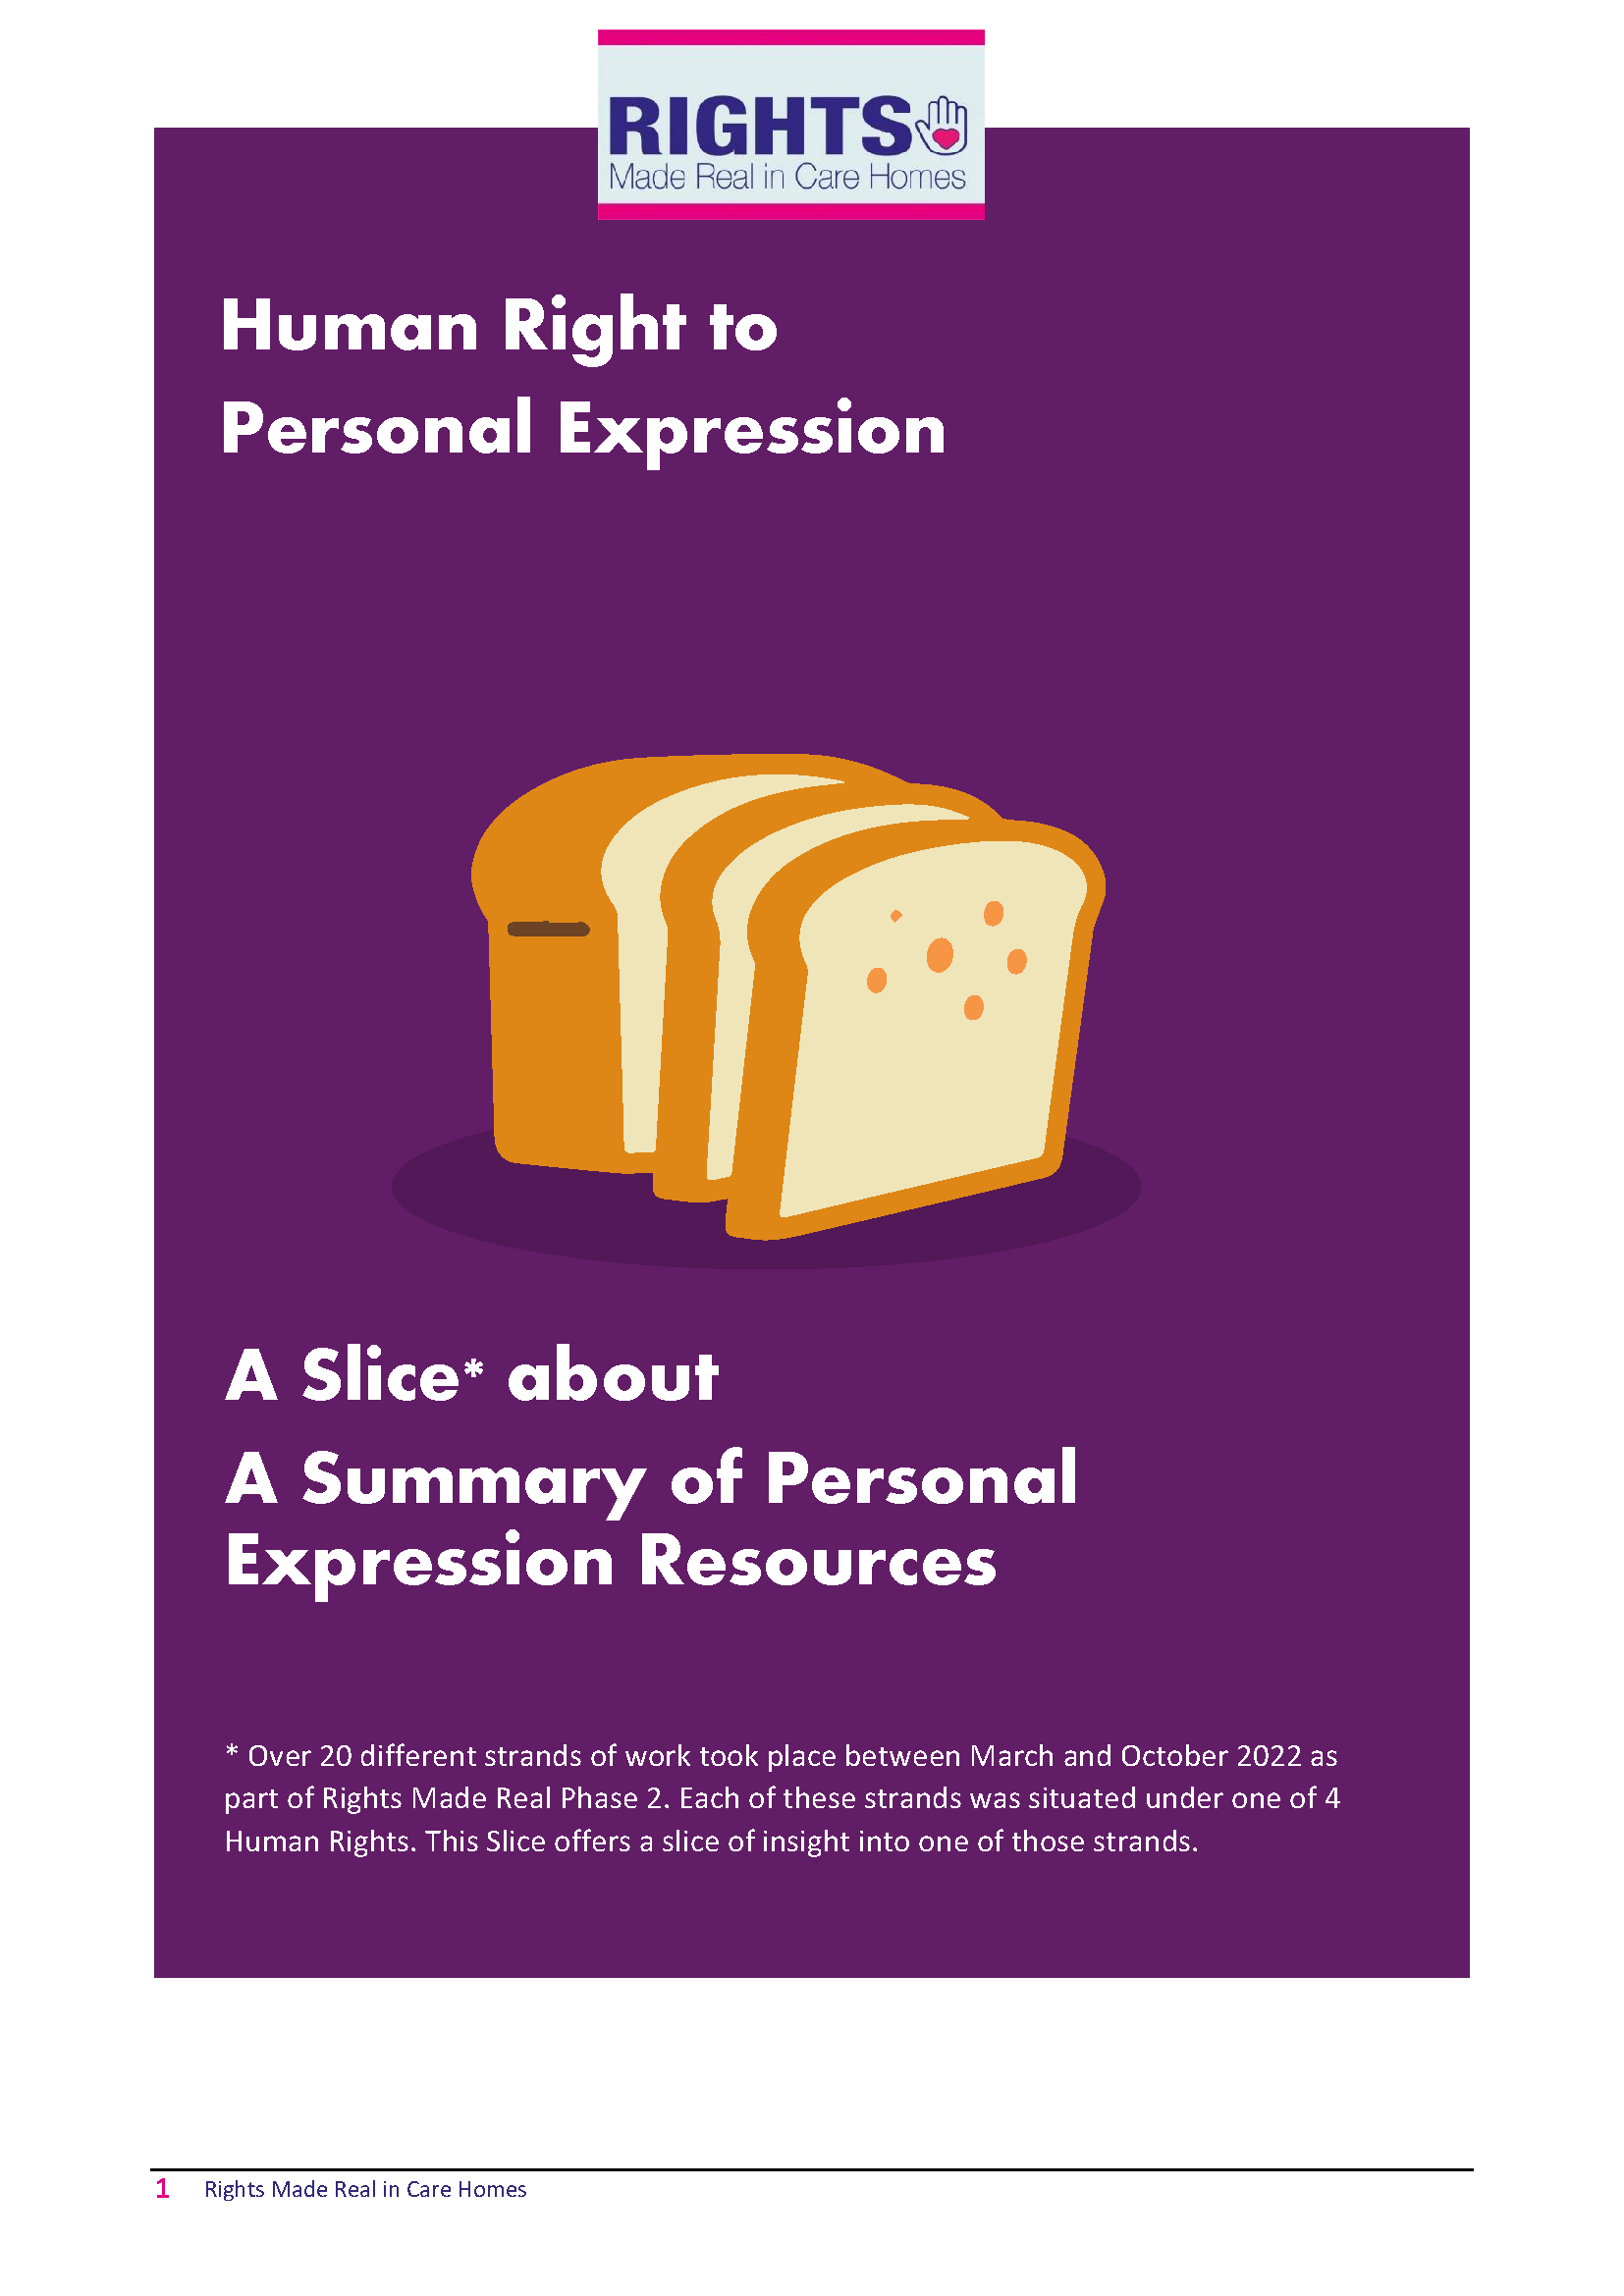 Summary of Personal Expression Resources